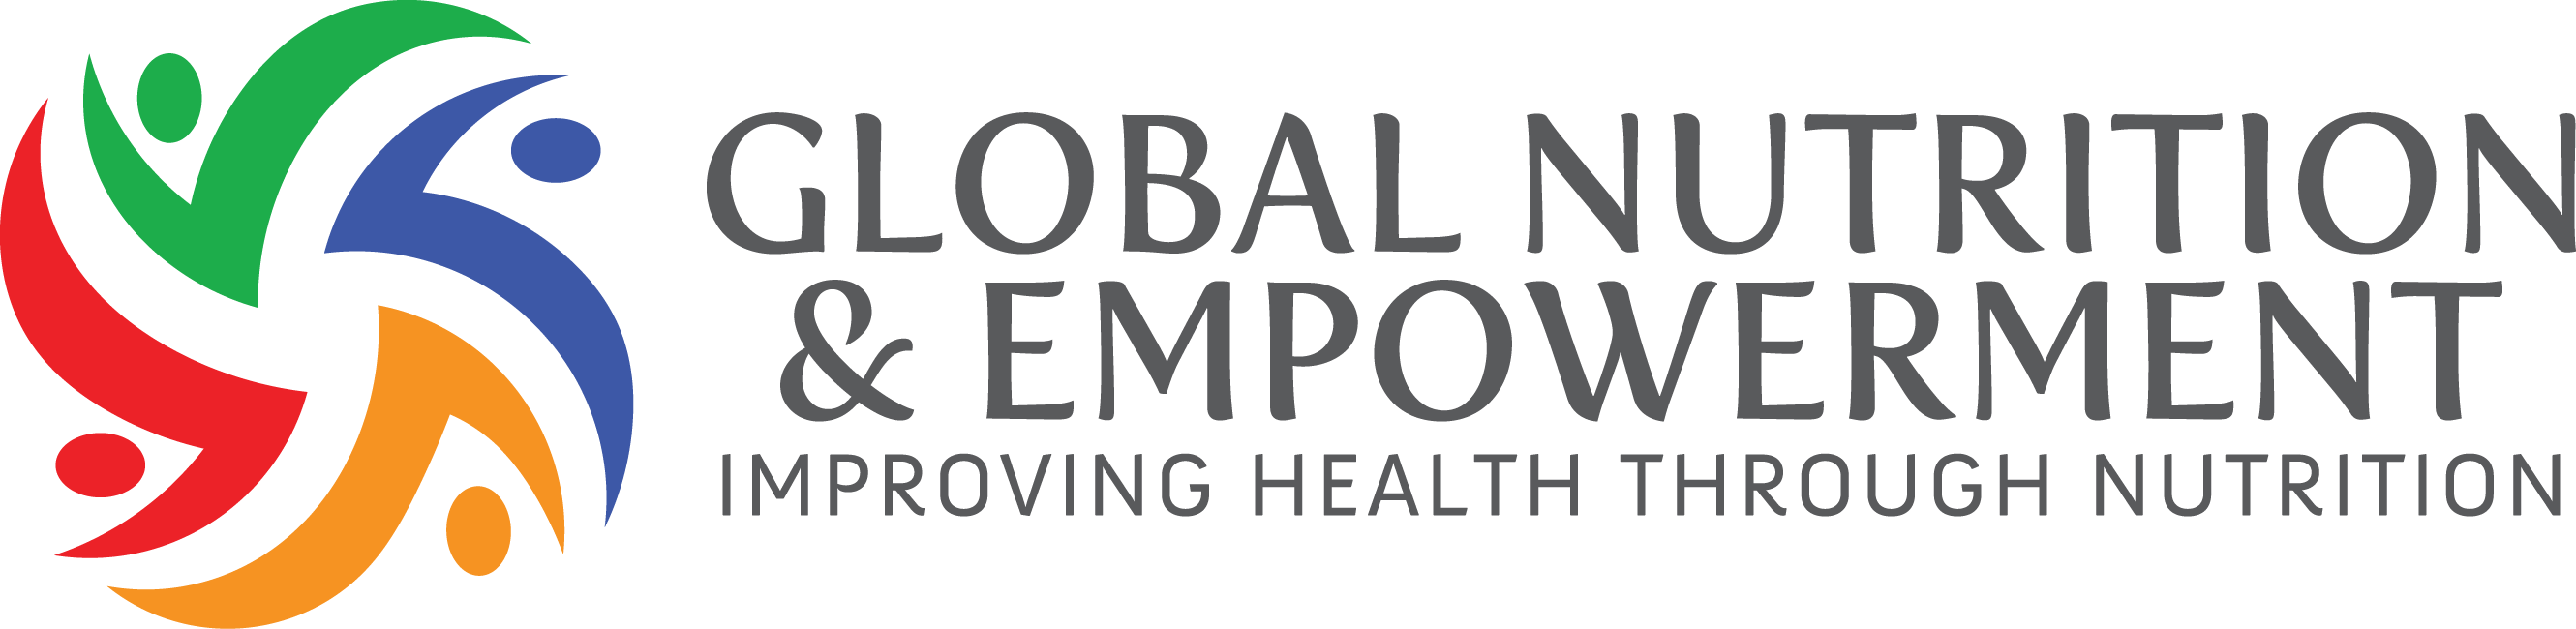 Global Nutrition Empowerment